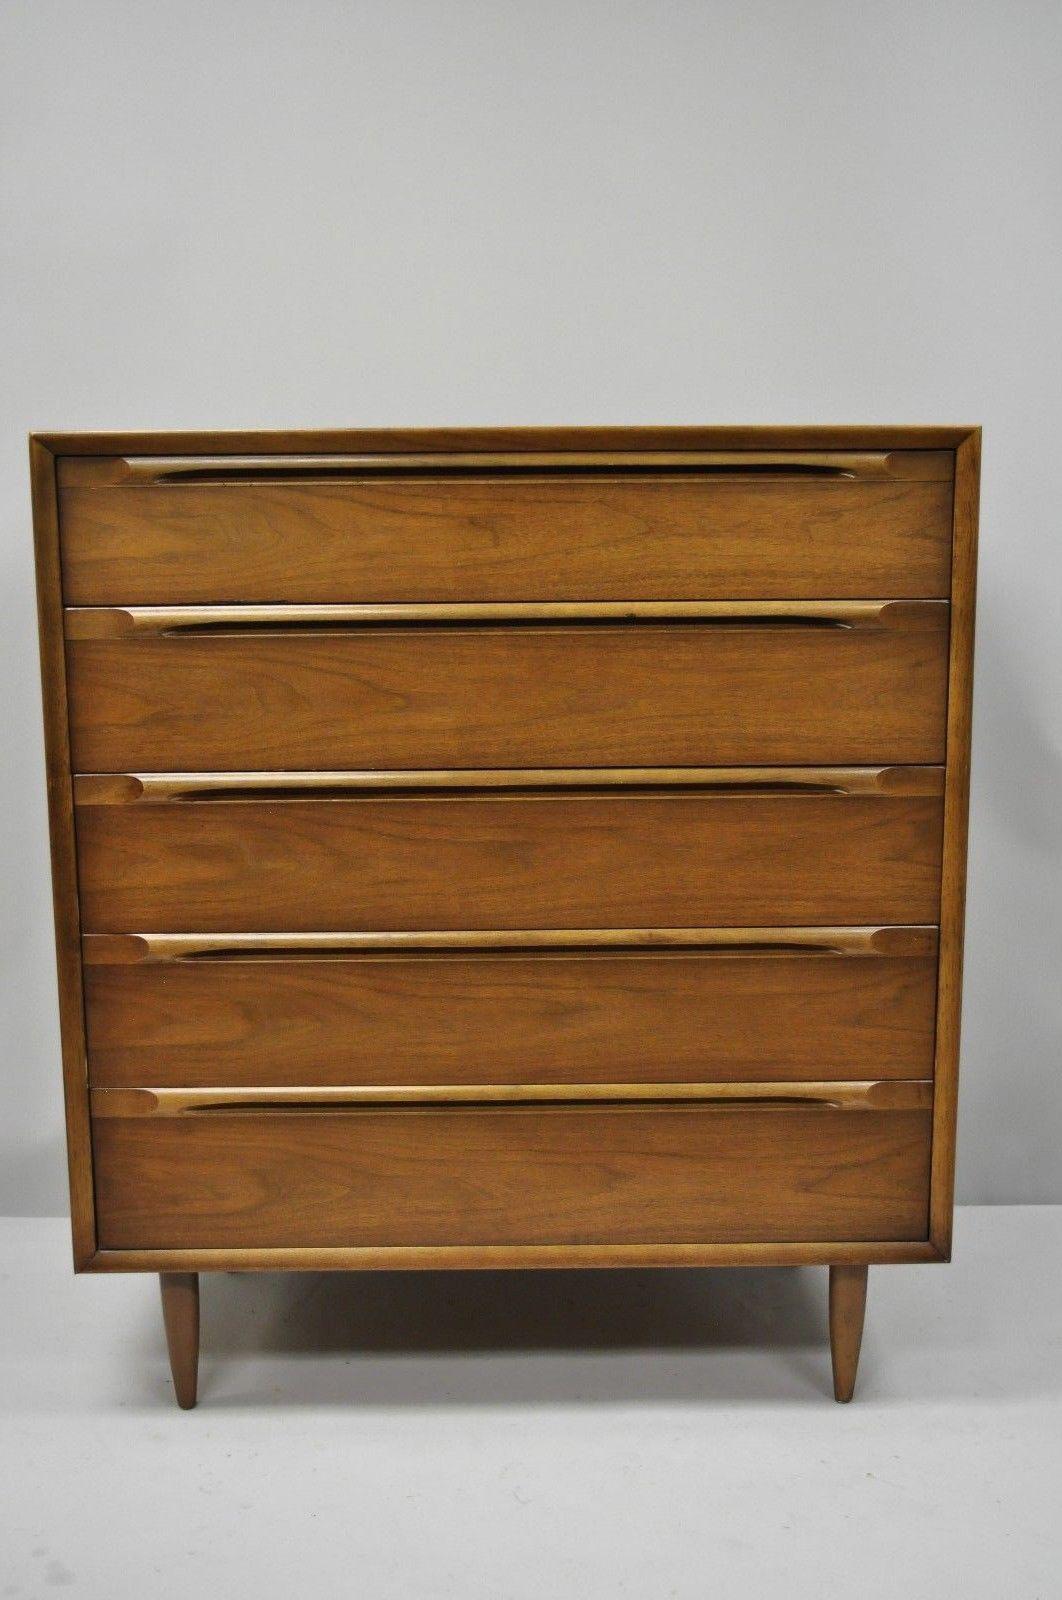 Vintage Mid-Century Modern walnut tall chest dresser with sculpted wood pulls. Item features sculpted wood drawer pulls, beautiful wood grain, serial number #1880-3 DR H-138, five dovetailed drawers, tapered legs, and clean Modernist lines, circa